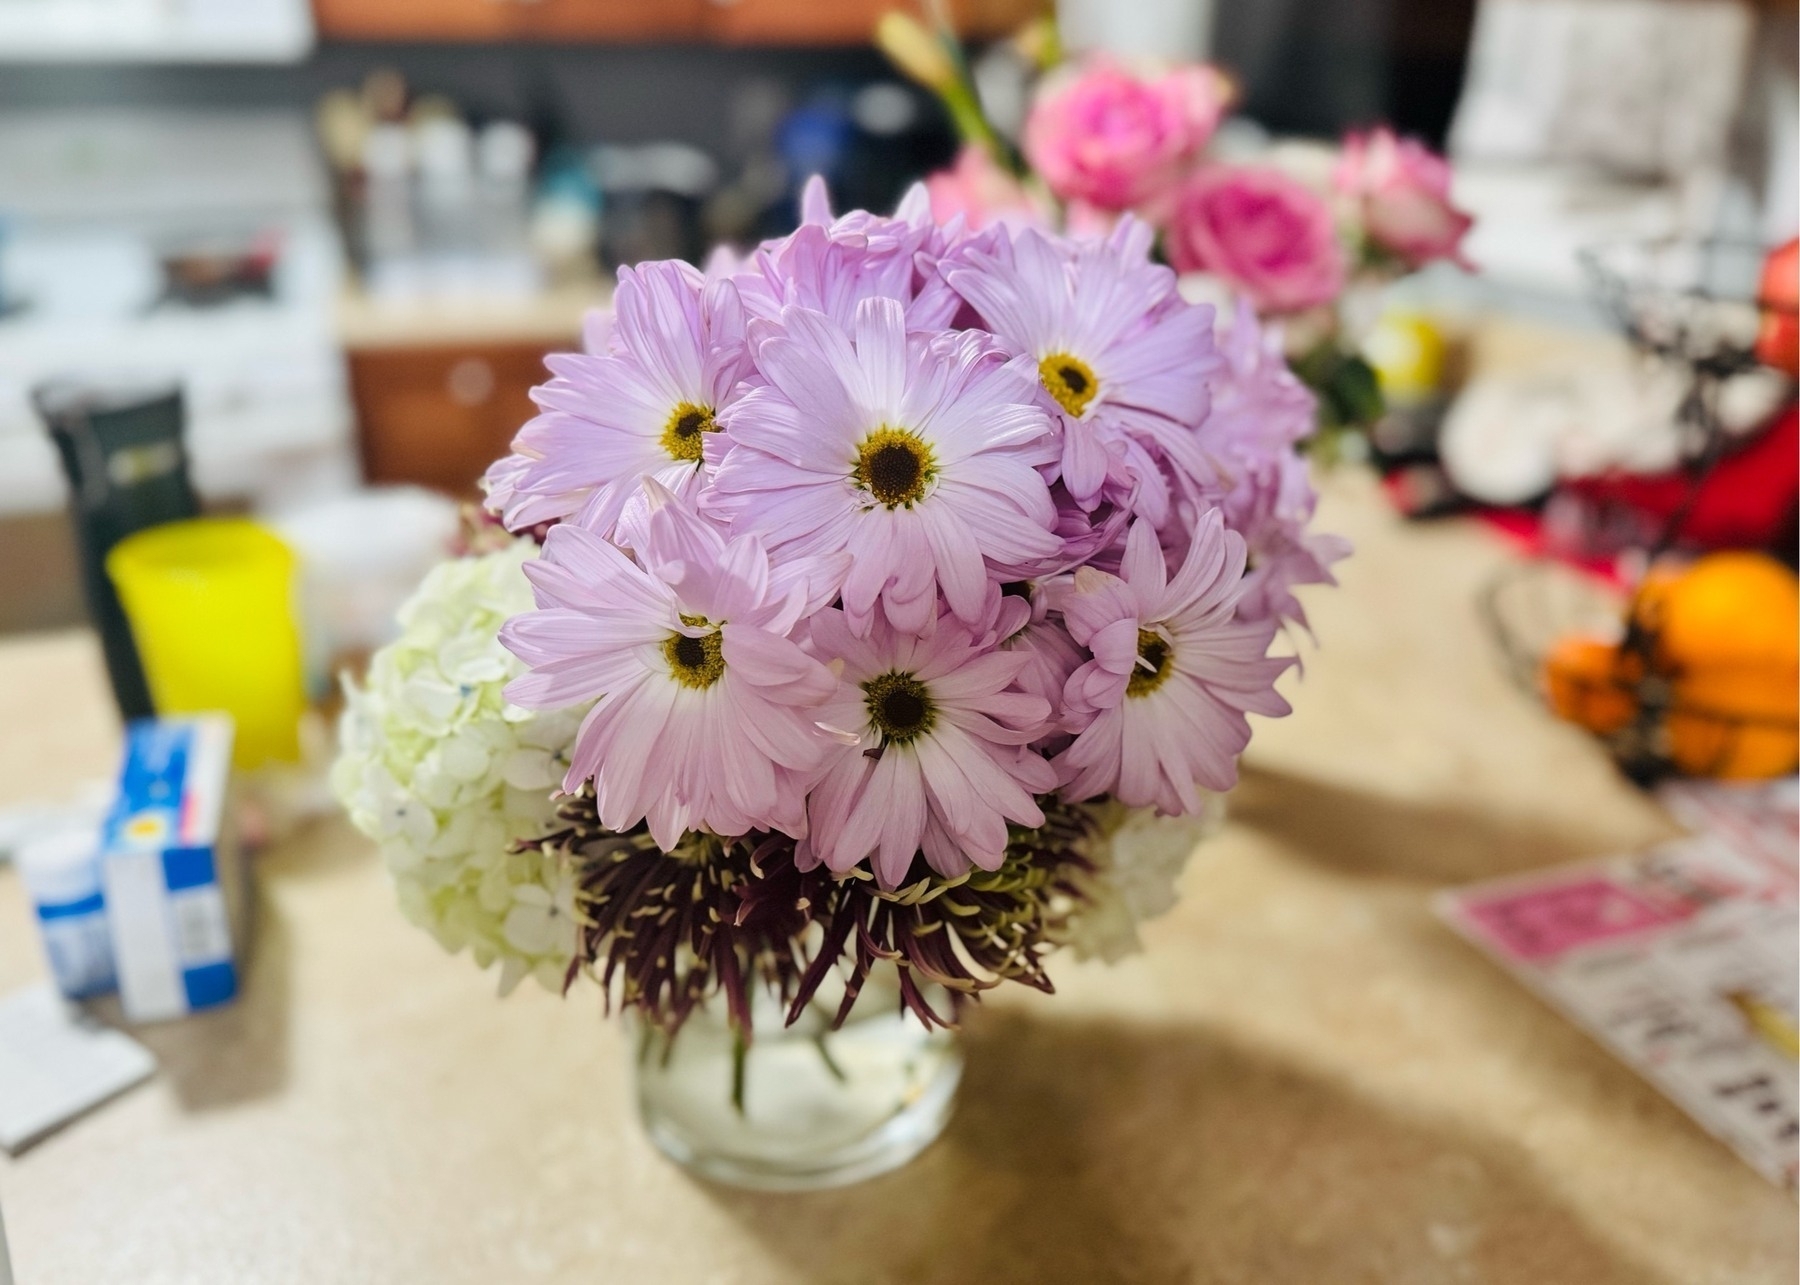 Flowers on our (messy) kitchen counter. 